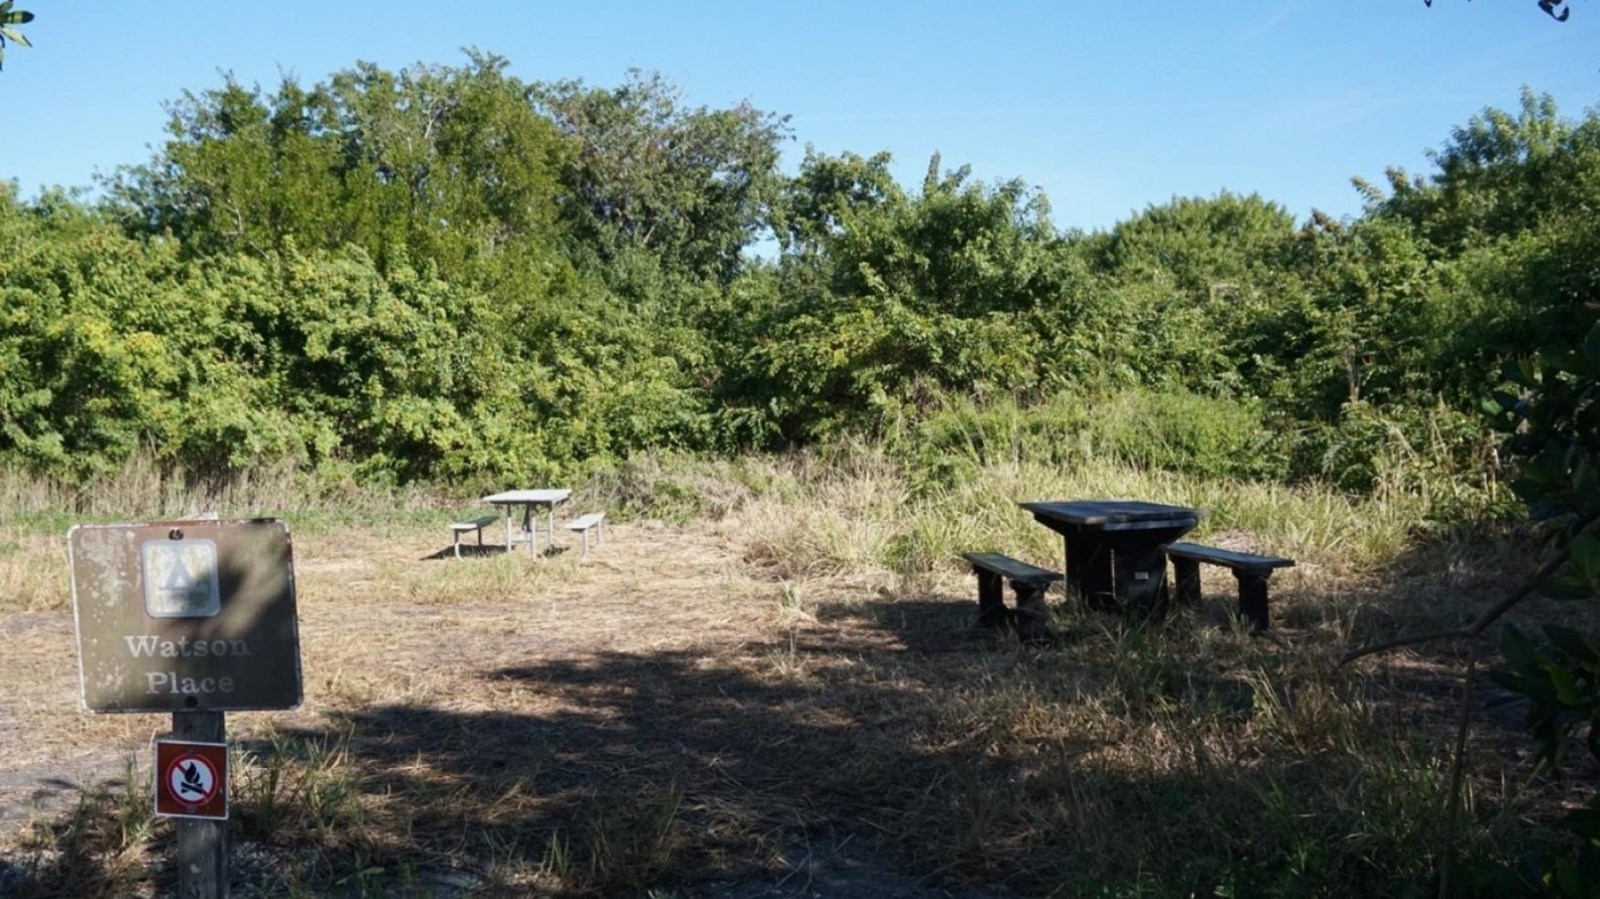 Two picnic tables border an overgrown camp clearing. Thick green vegetation surrounds the area